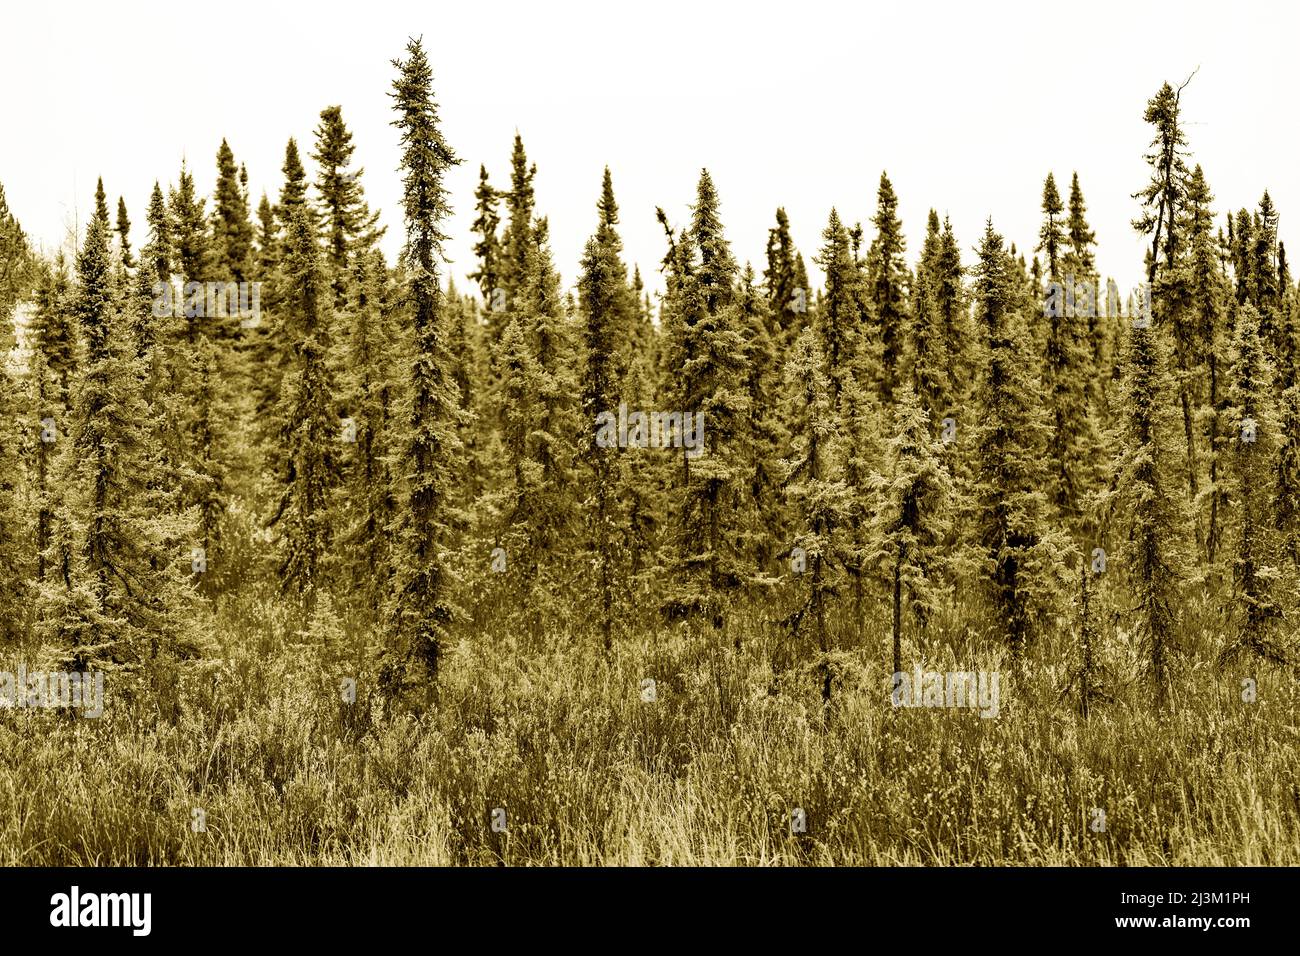 Landscape of a dense forest of evergreen trees and a tall grasses in the foreground, viewed along Highway 97 in BC, Canada; British Columbia, Canada Stock Photo